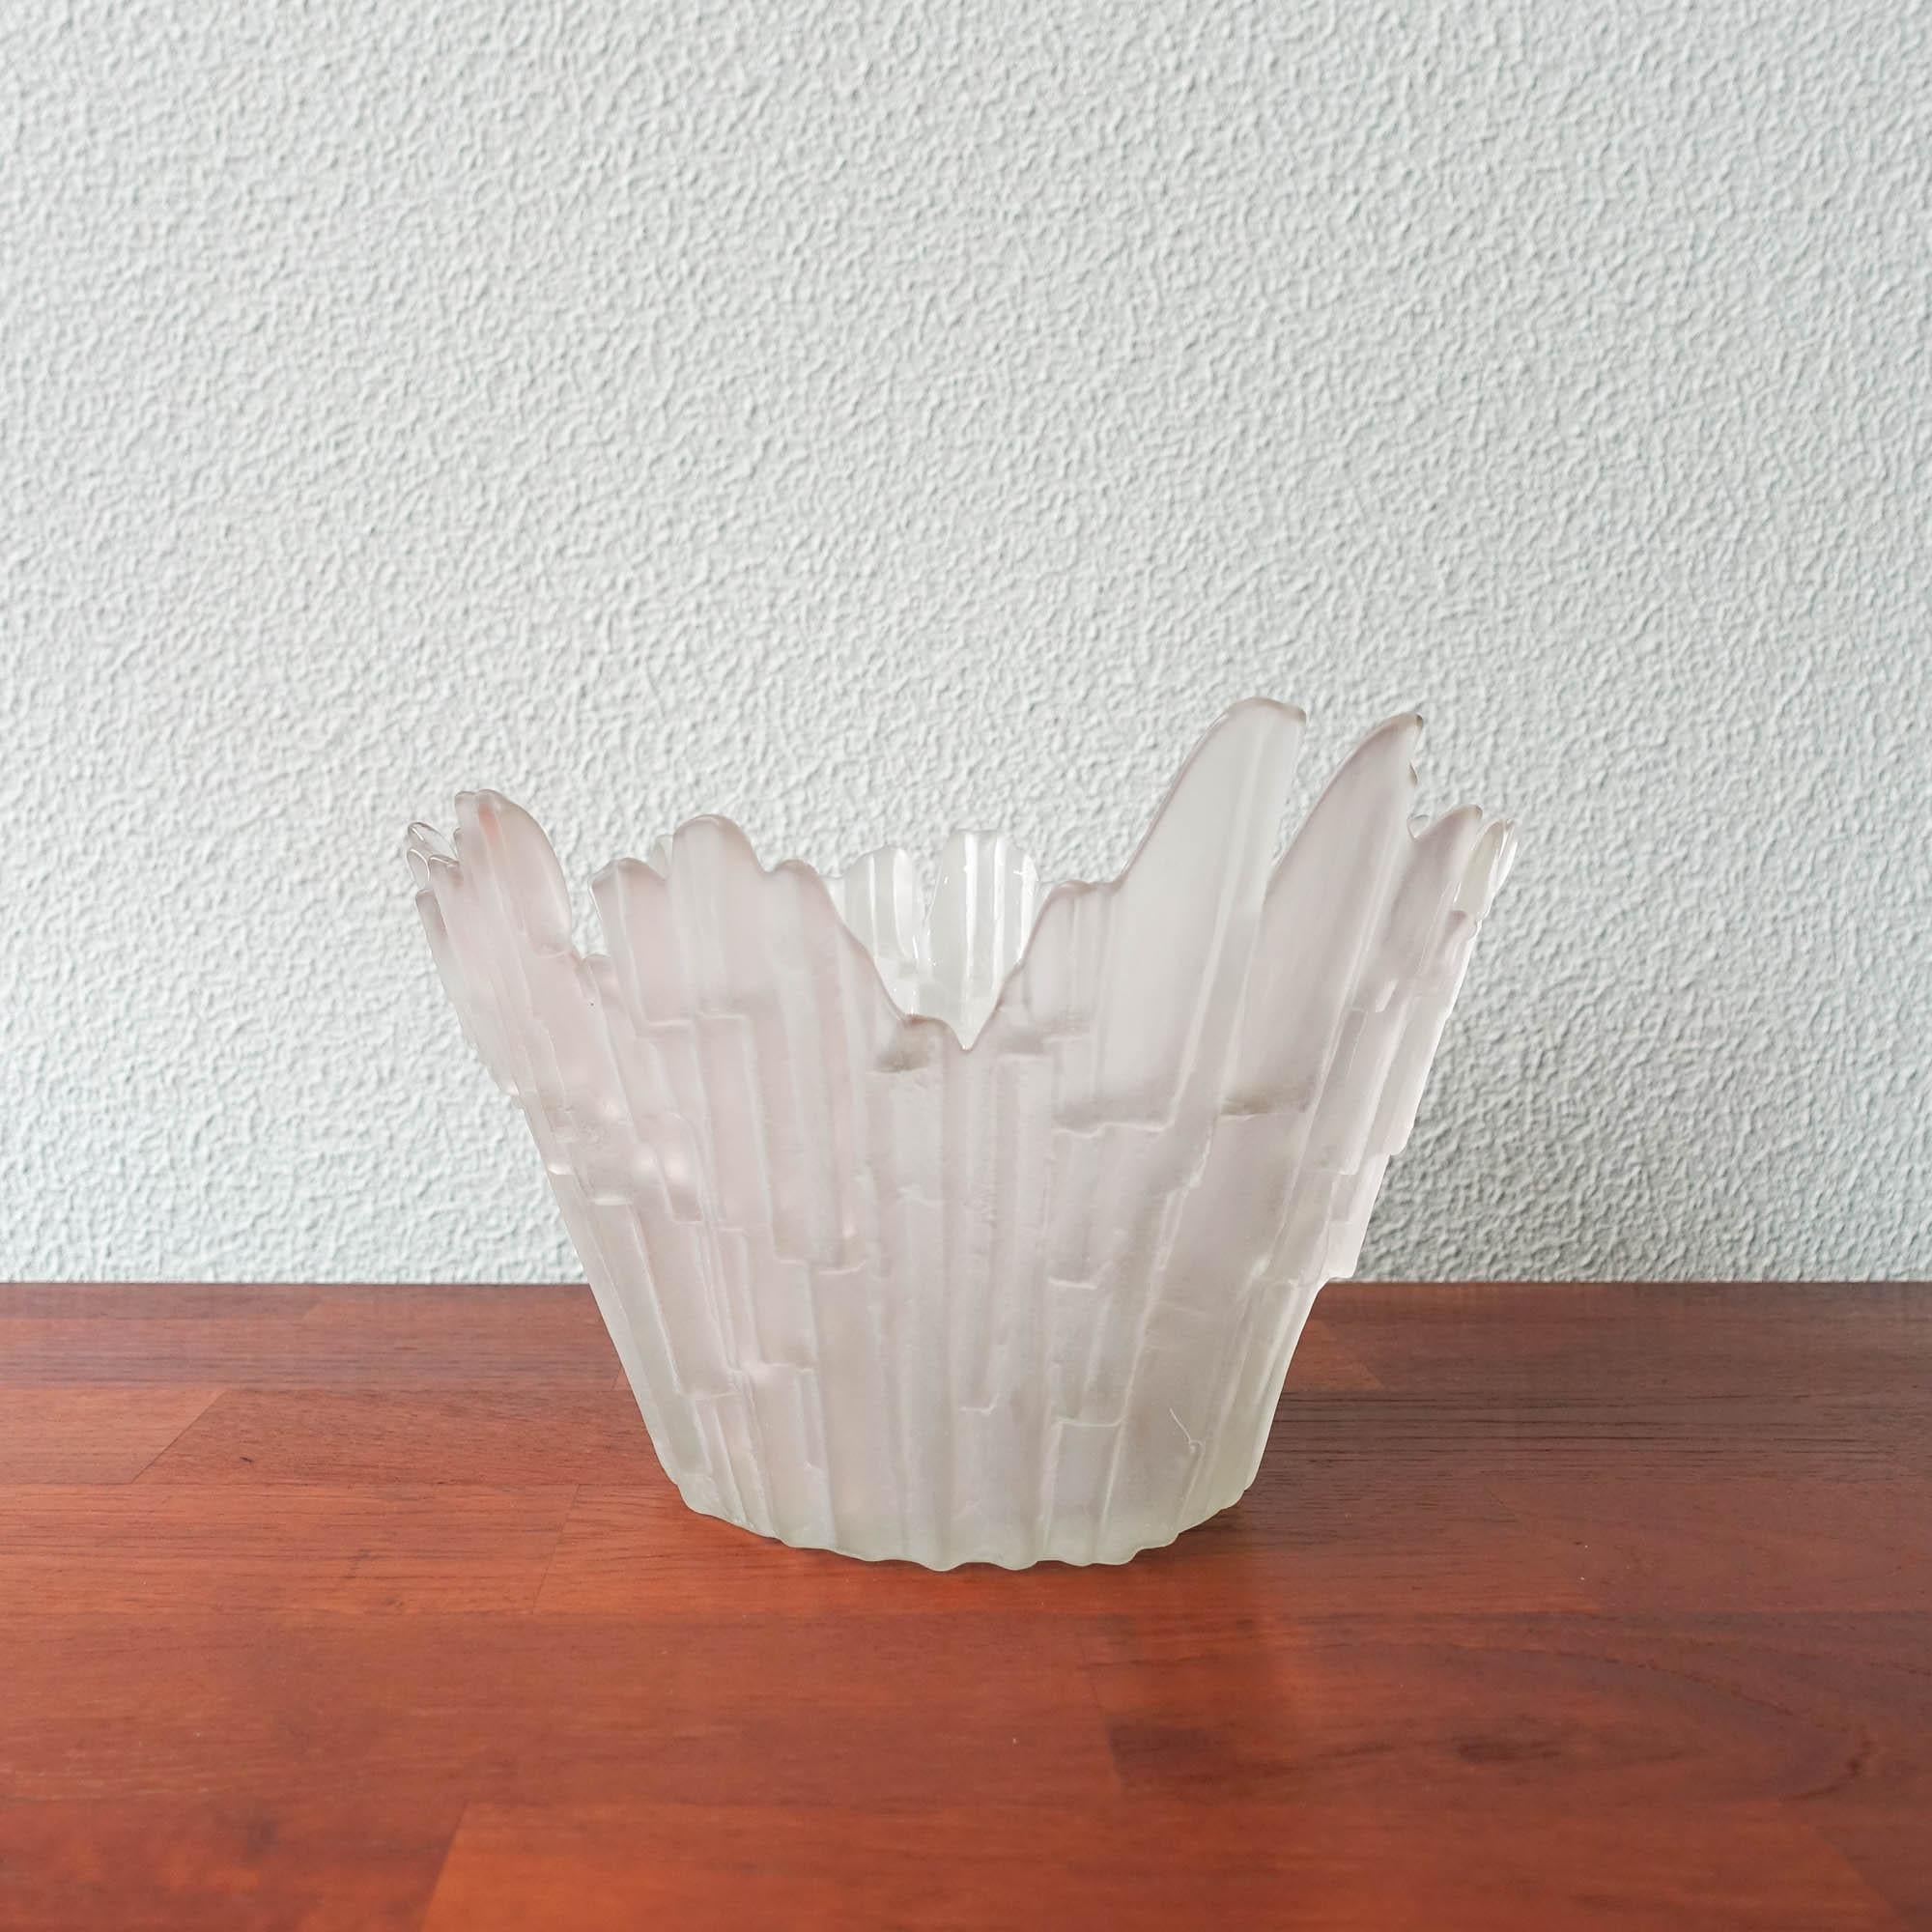 Scandinavian Modern Vintage Glass Bowl Northern Lights by Tauno Wirkkala for Humppilla Finland, 1970 For Sale